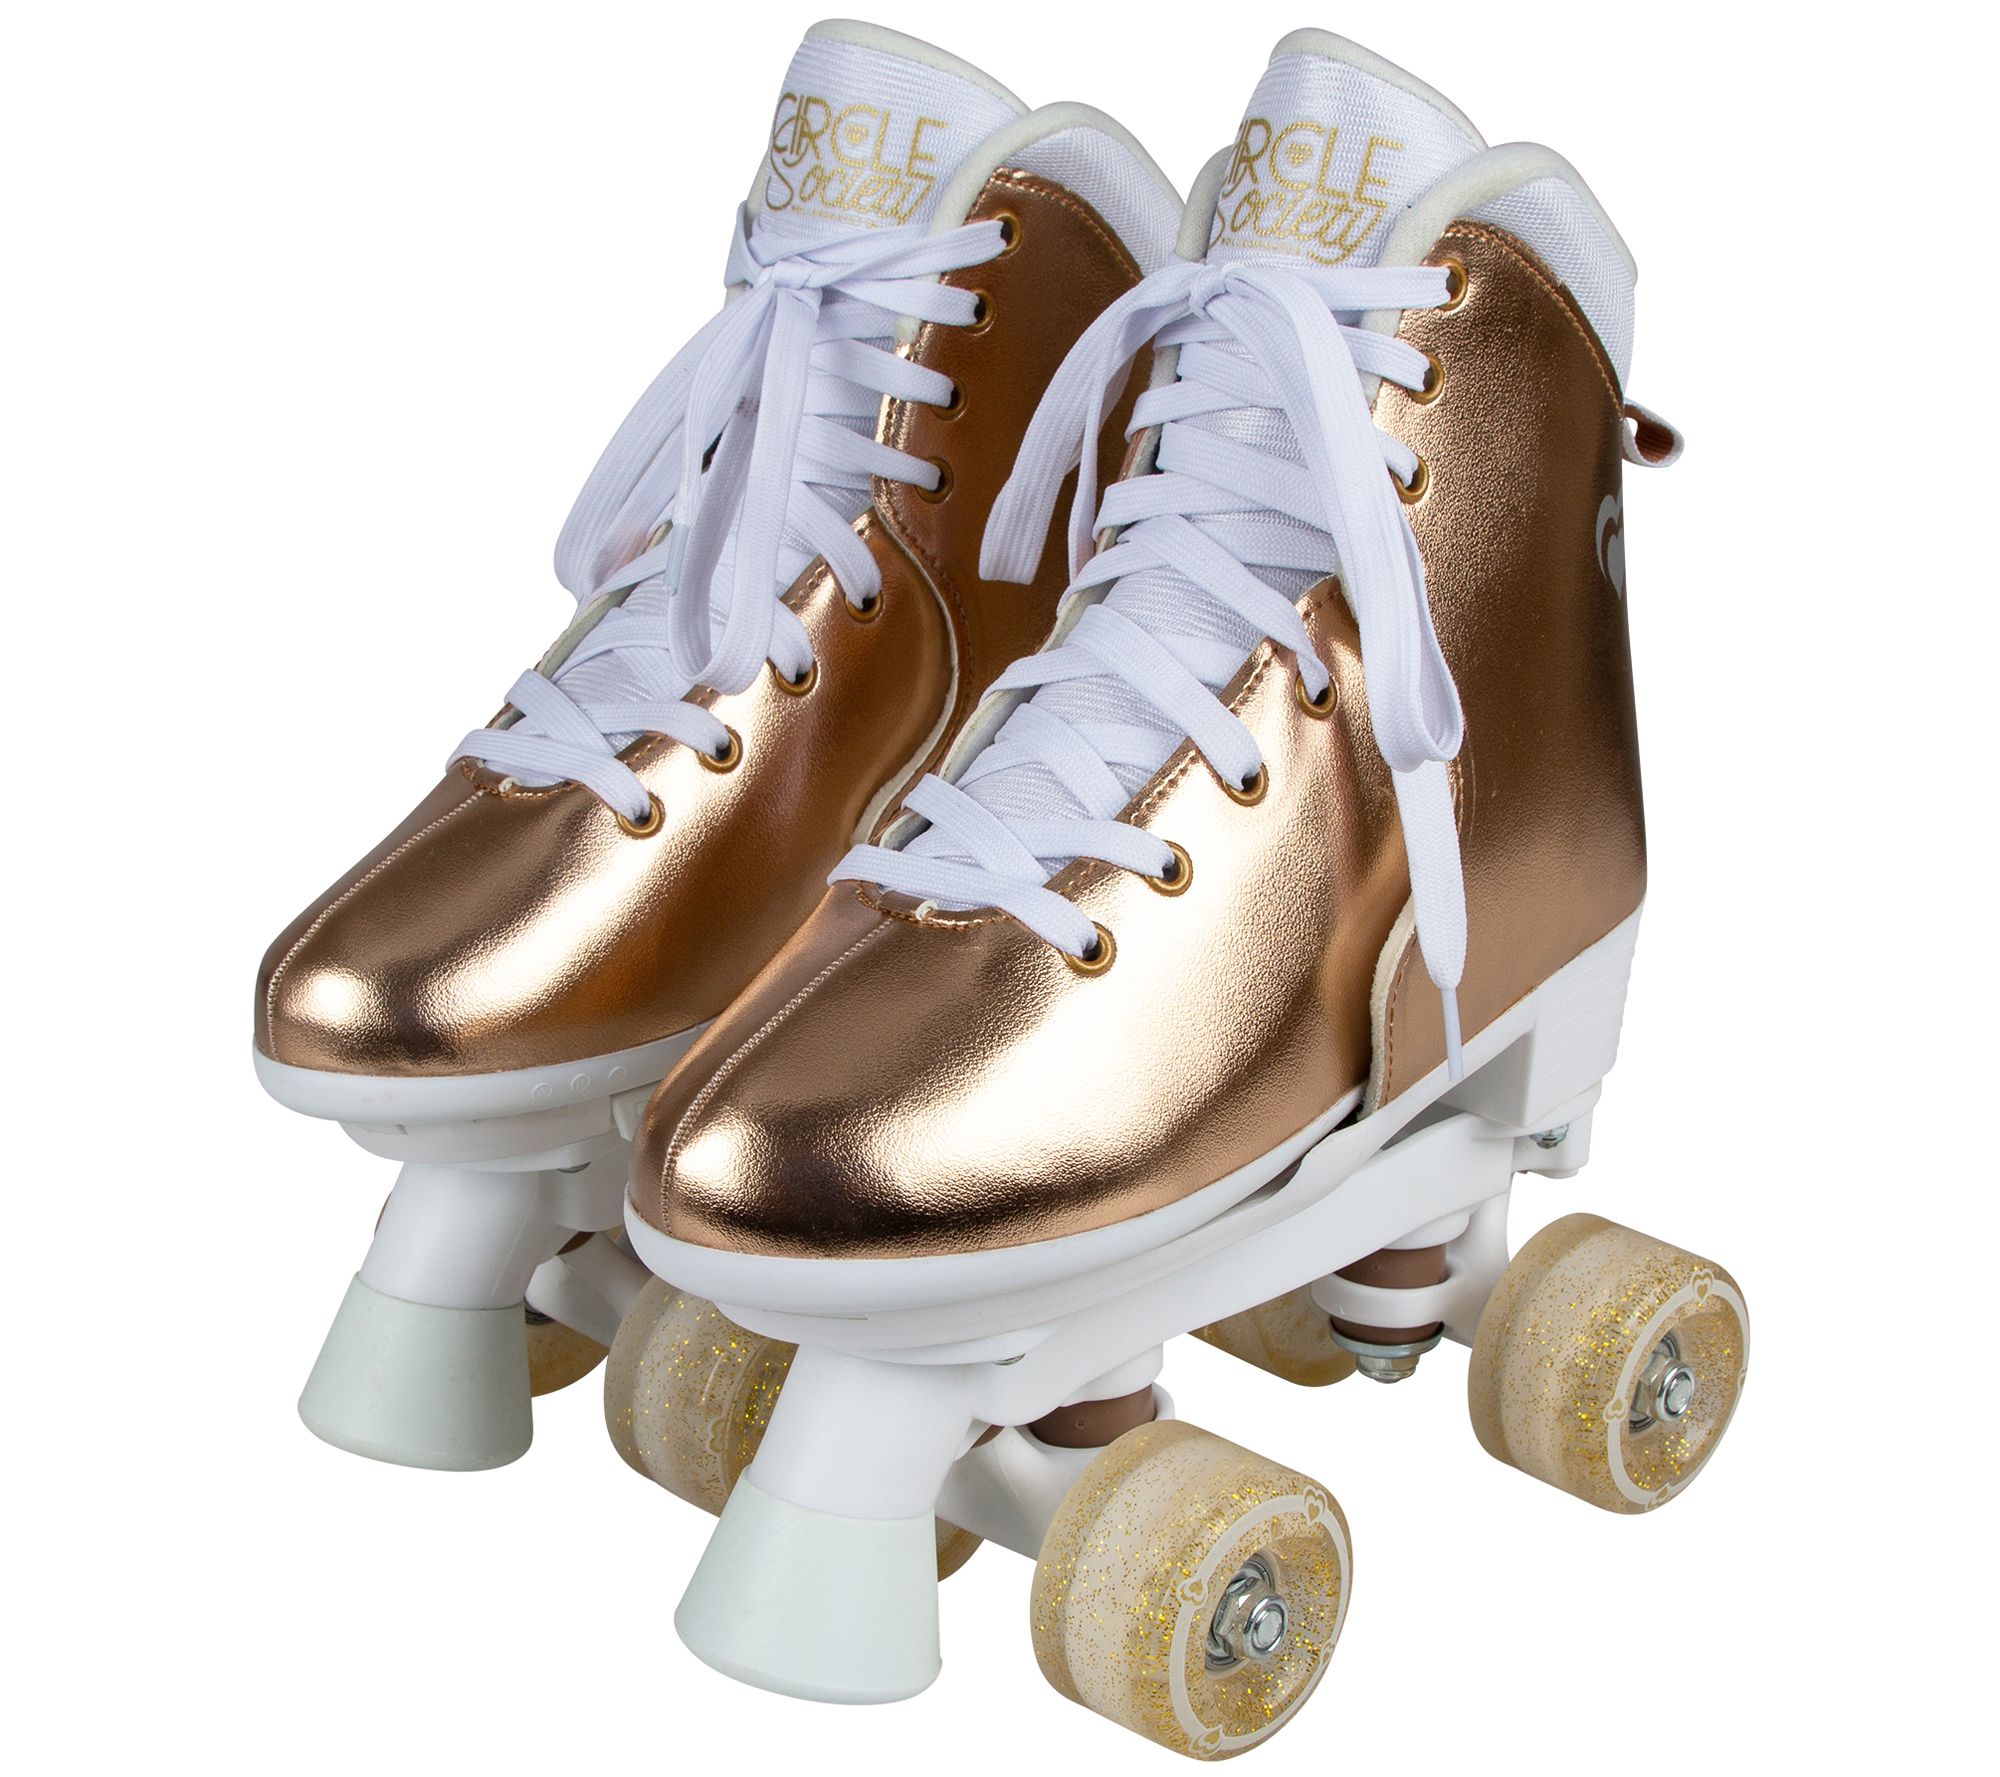 Circle Society Adjustable Skate Size 3-7 for sale online Classic Cotton Candy Jr 